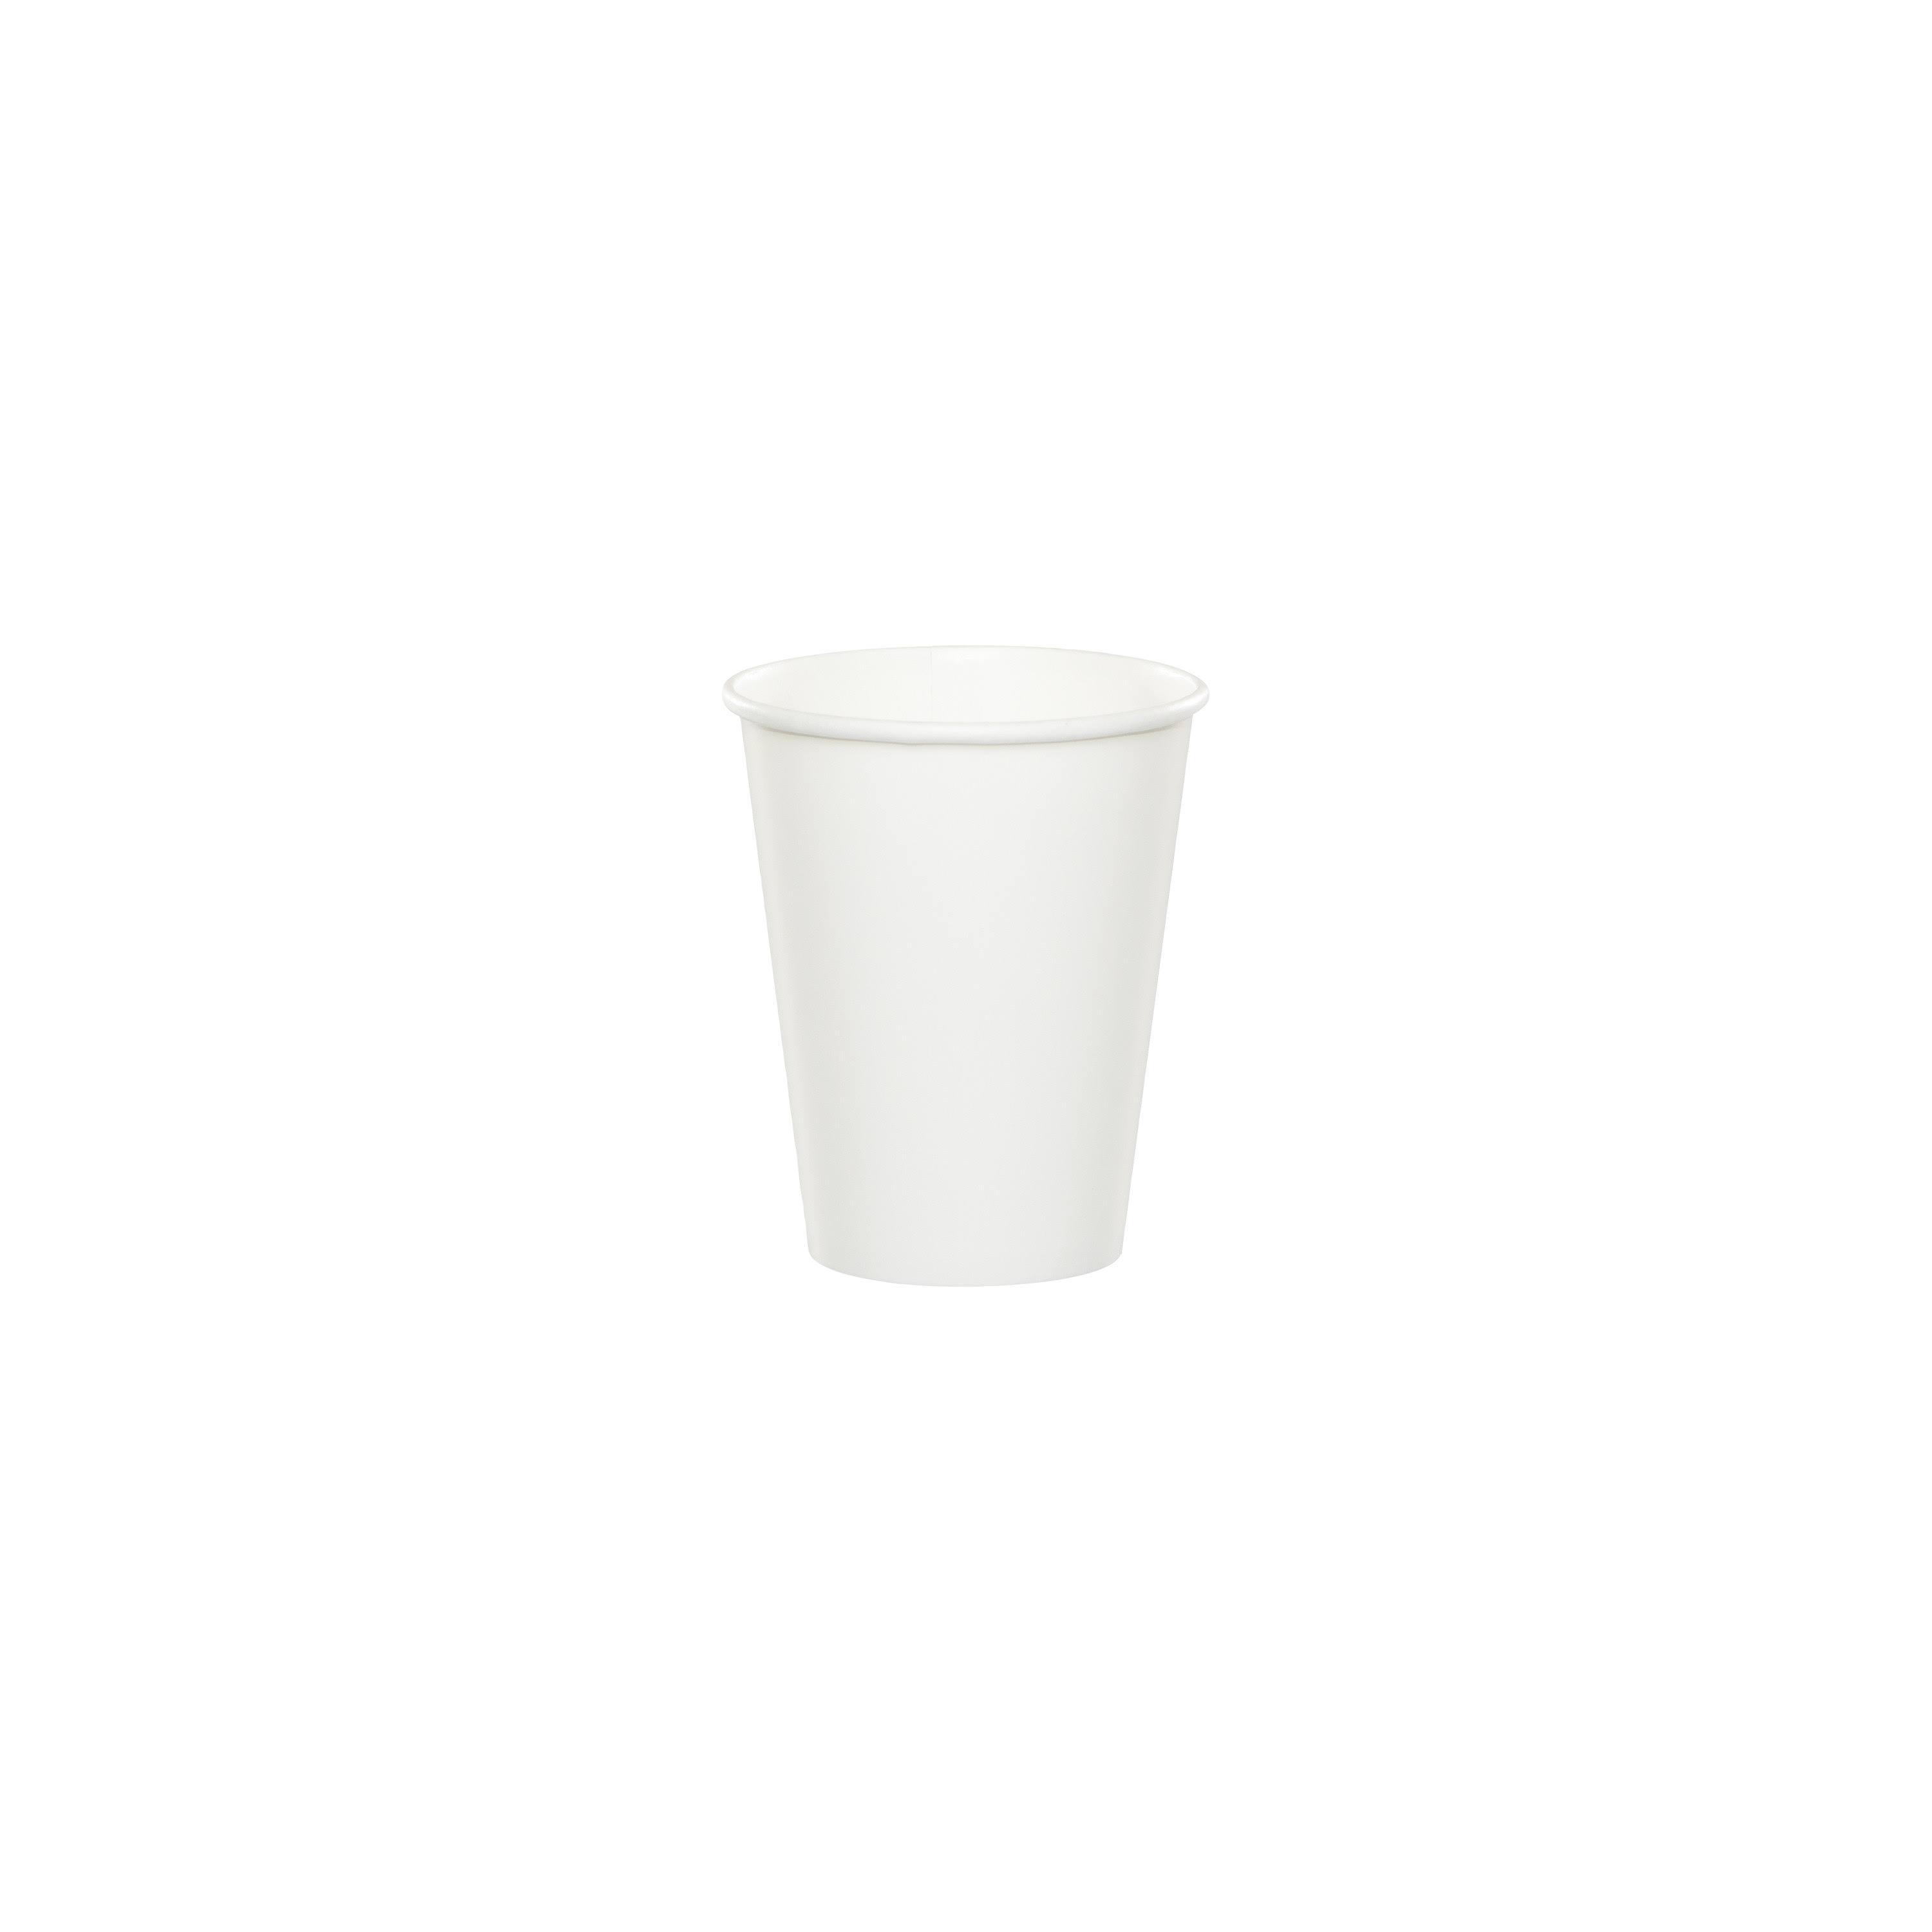 White Party Cups